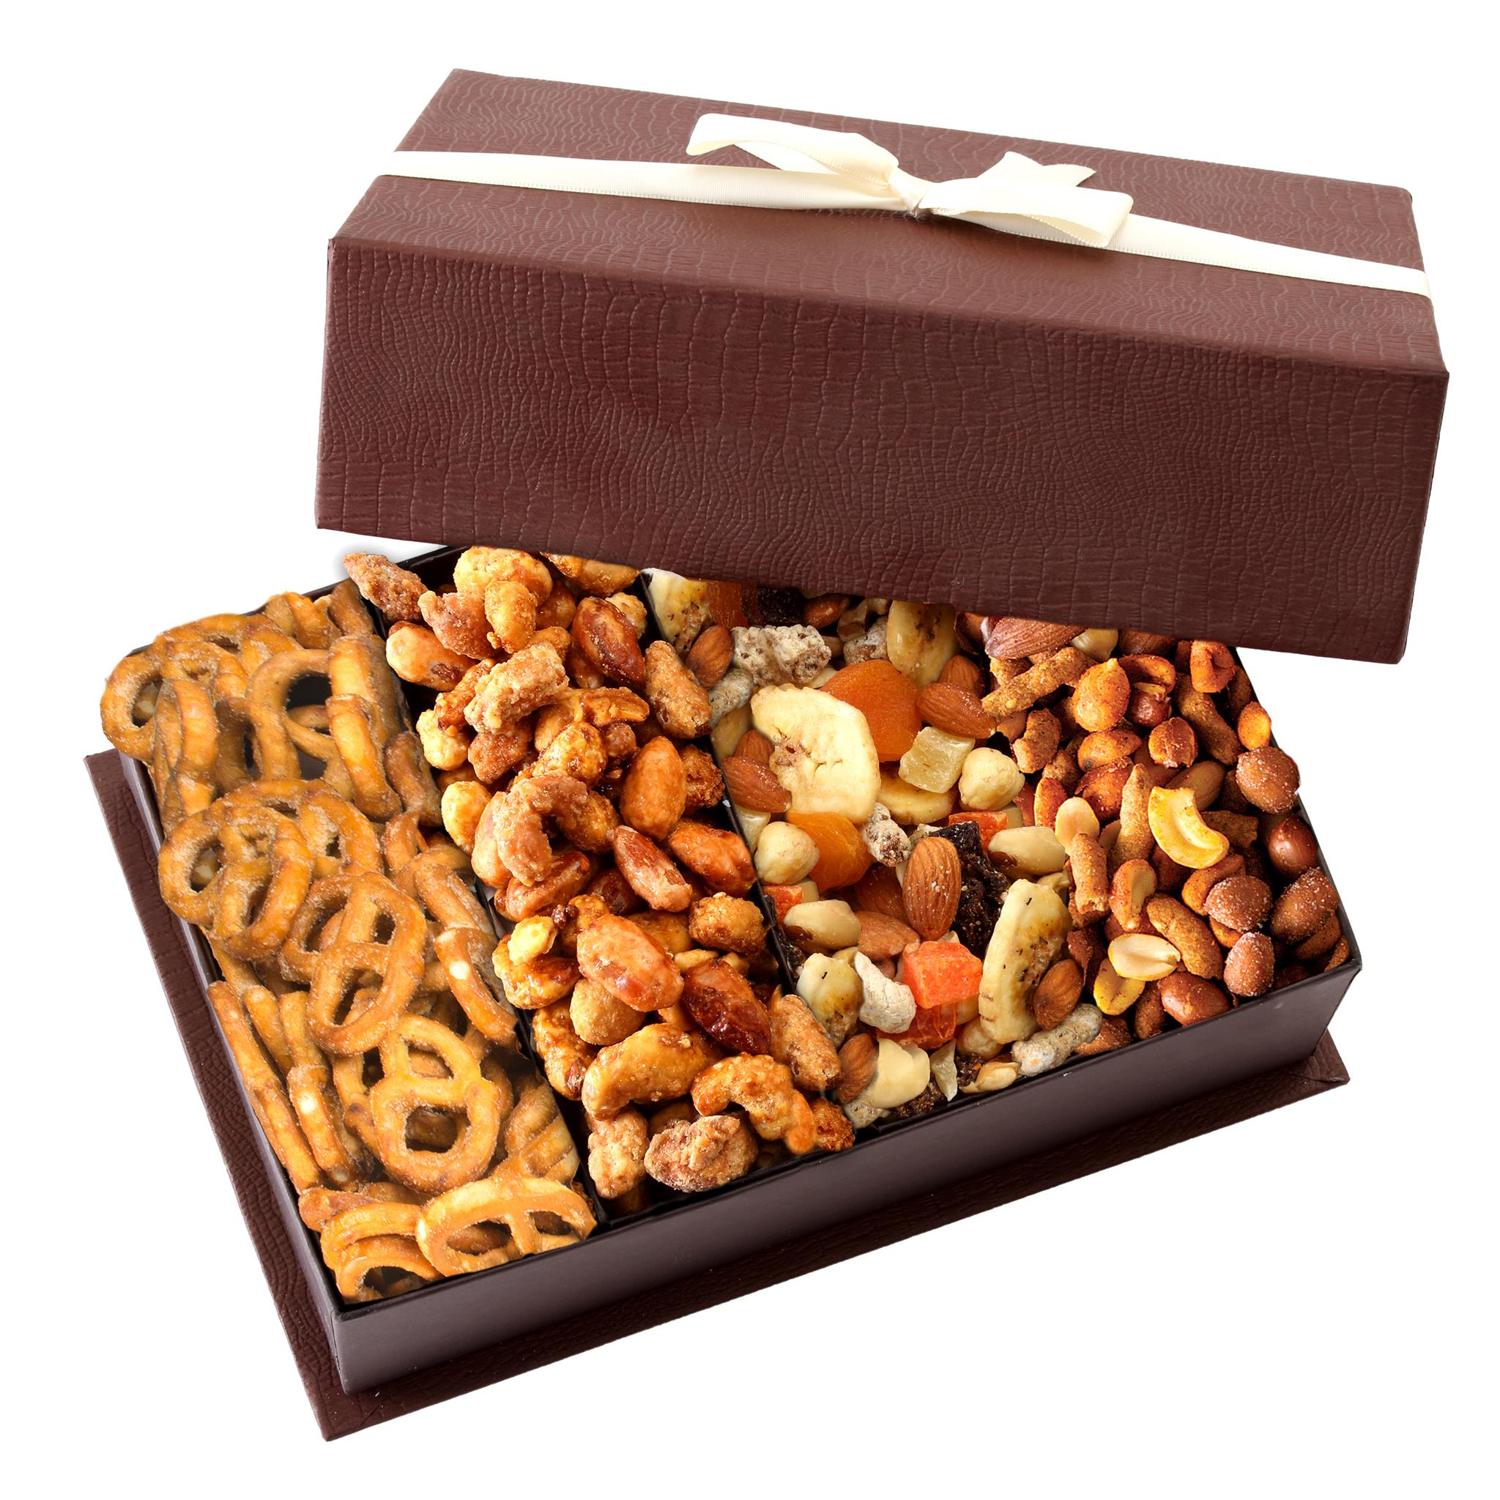 Broadway Basketeers Touch of Class Gourmet Fruit and Nut Gift Basket - image 1 of 2